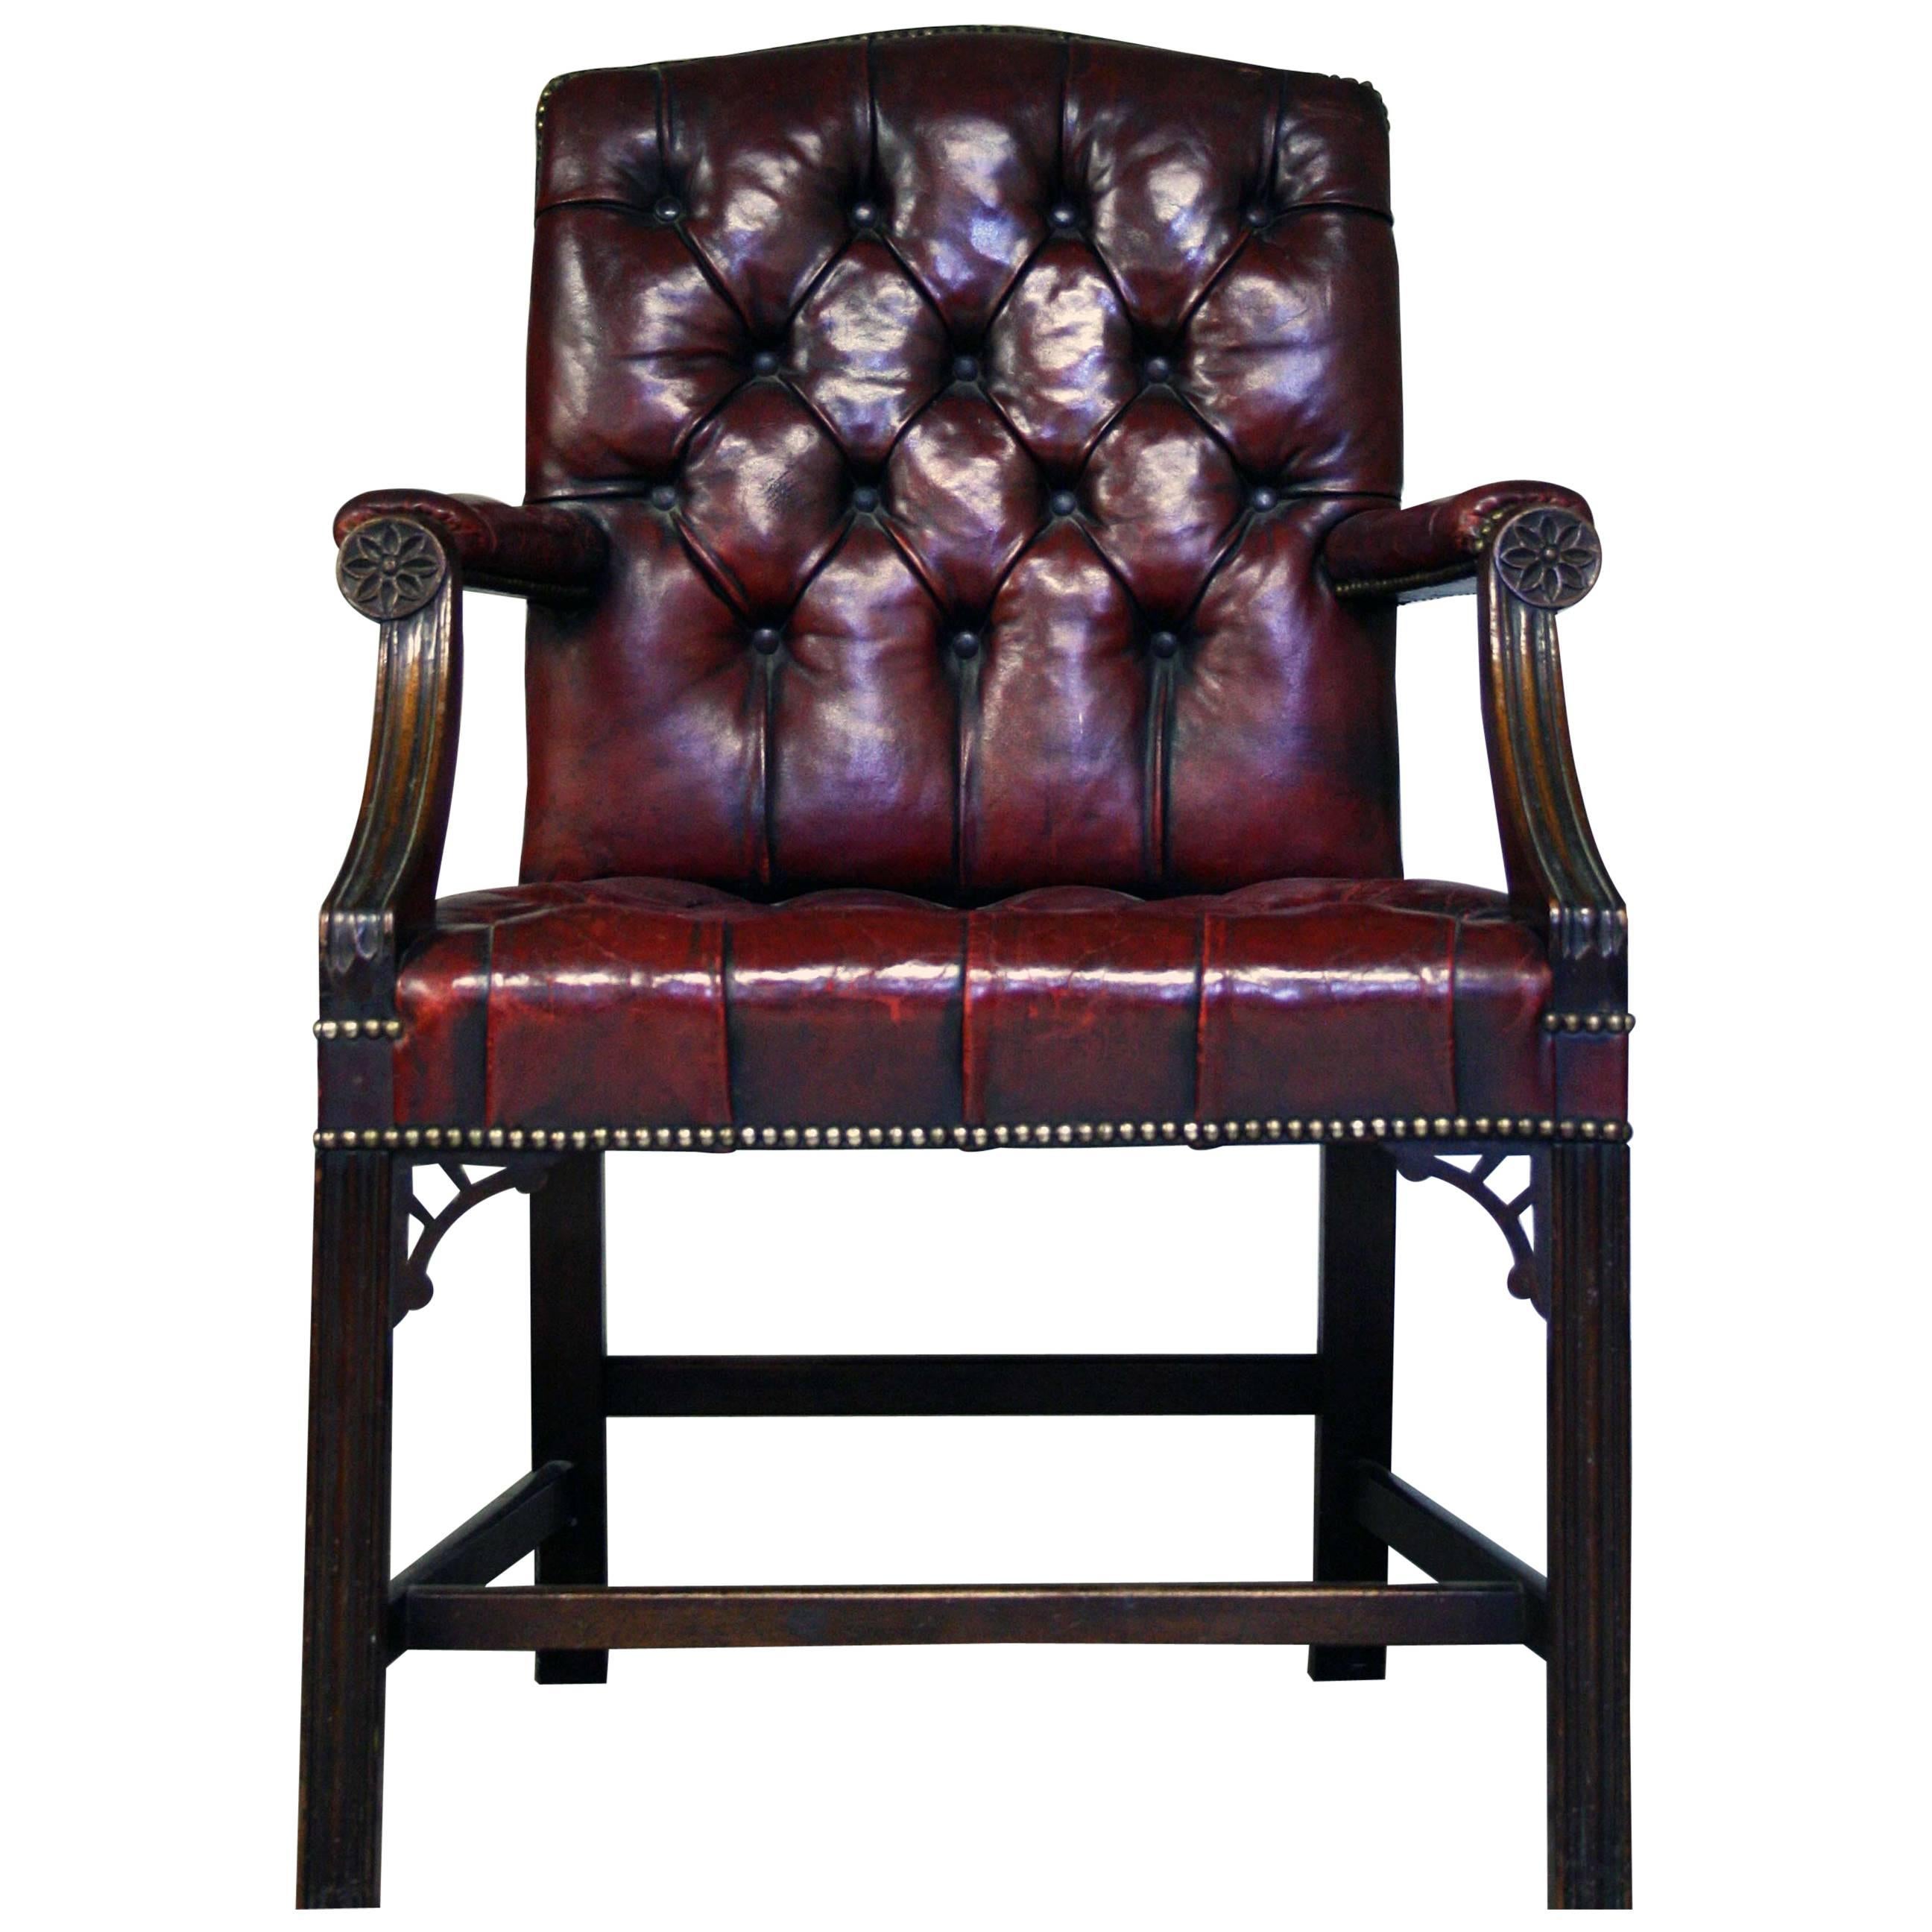 Early 20th Century Gainsborough Style Red Leather Chair